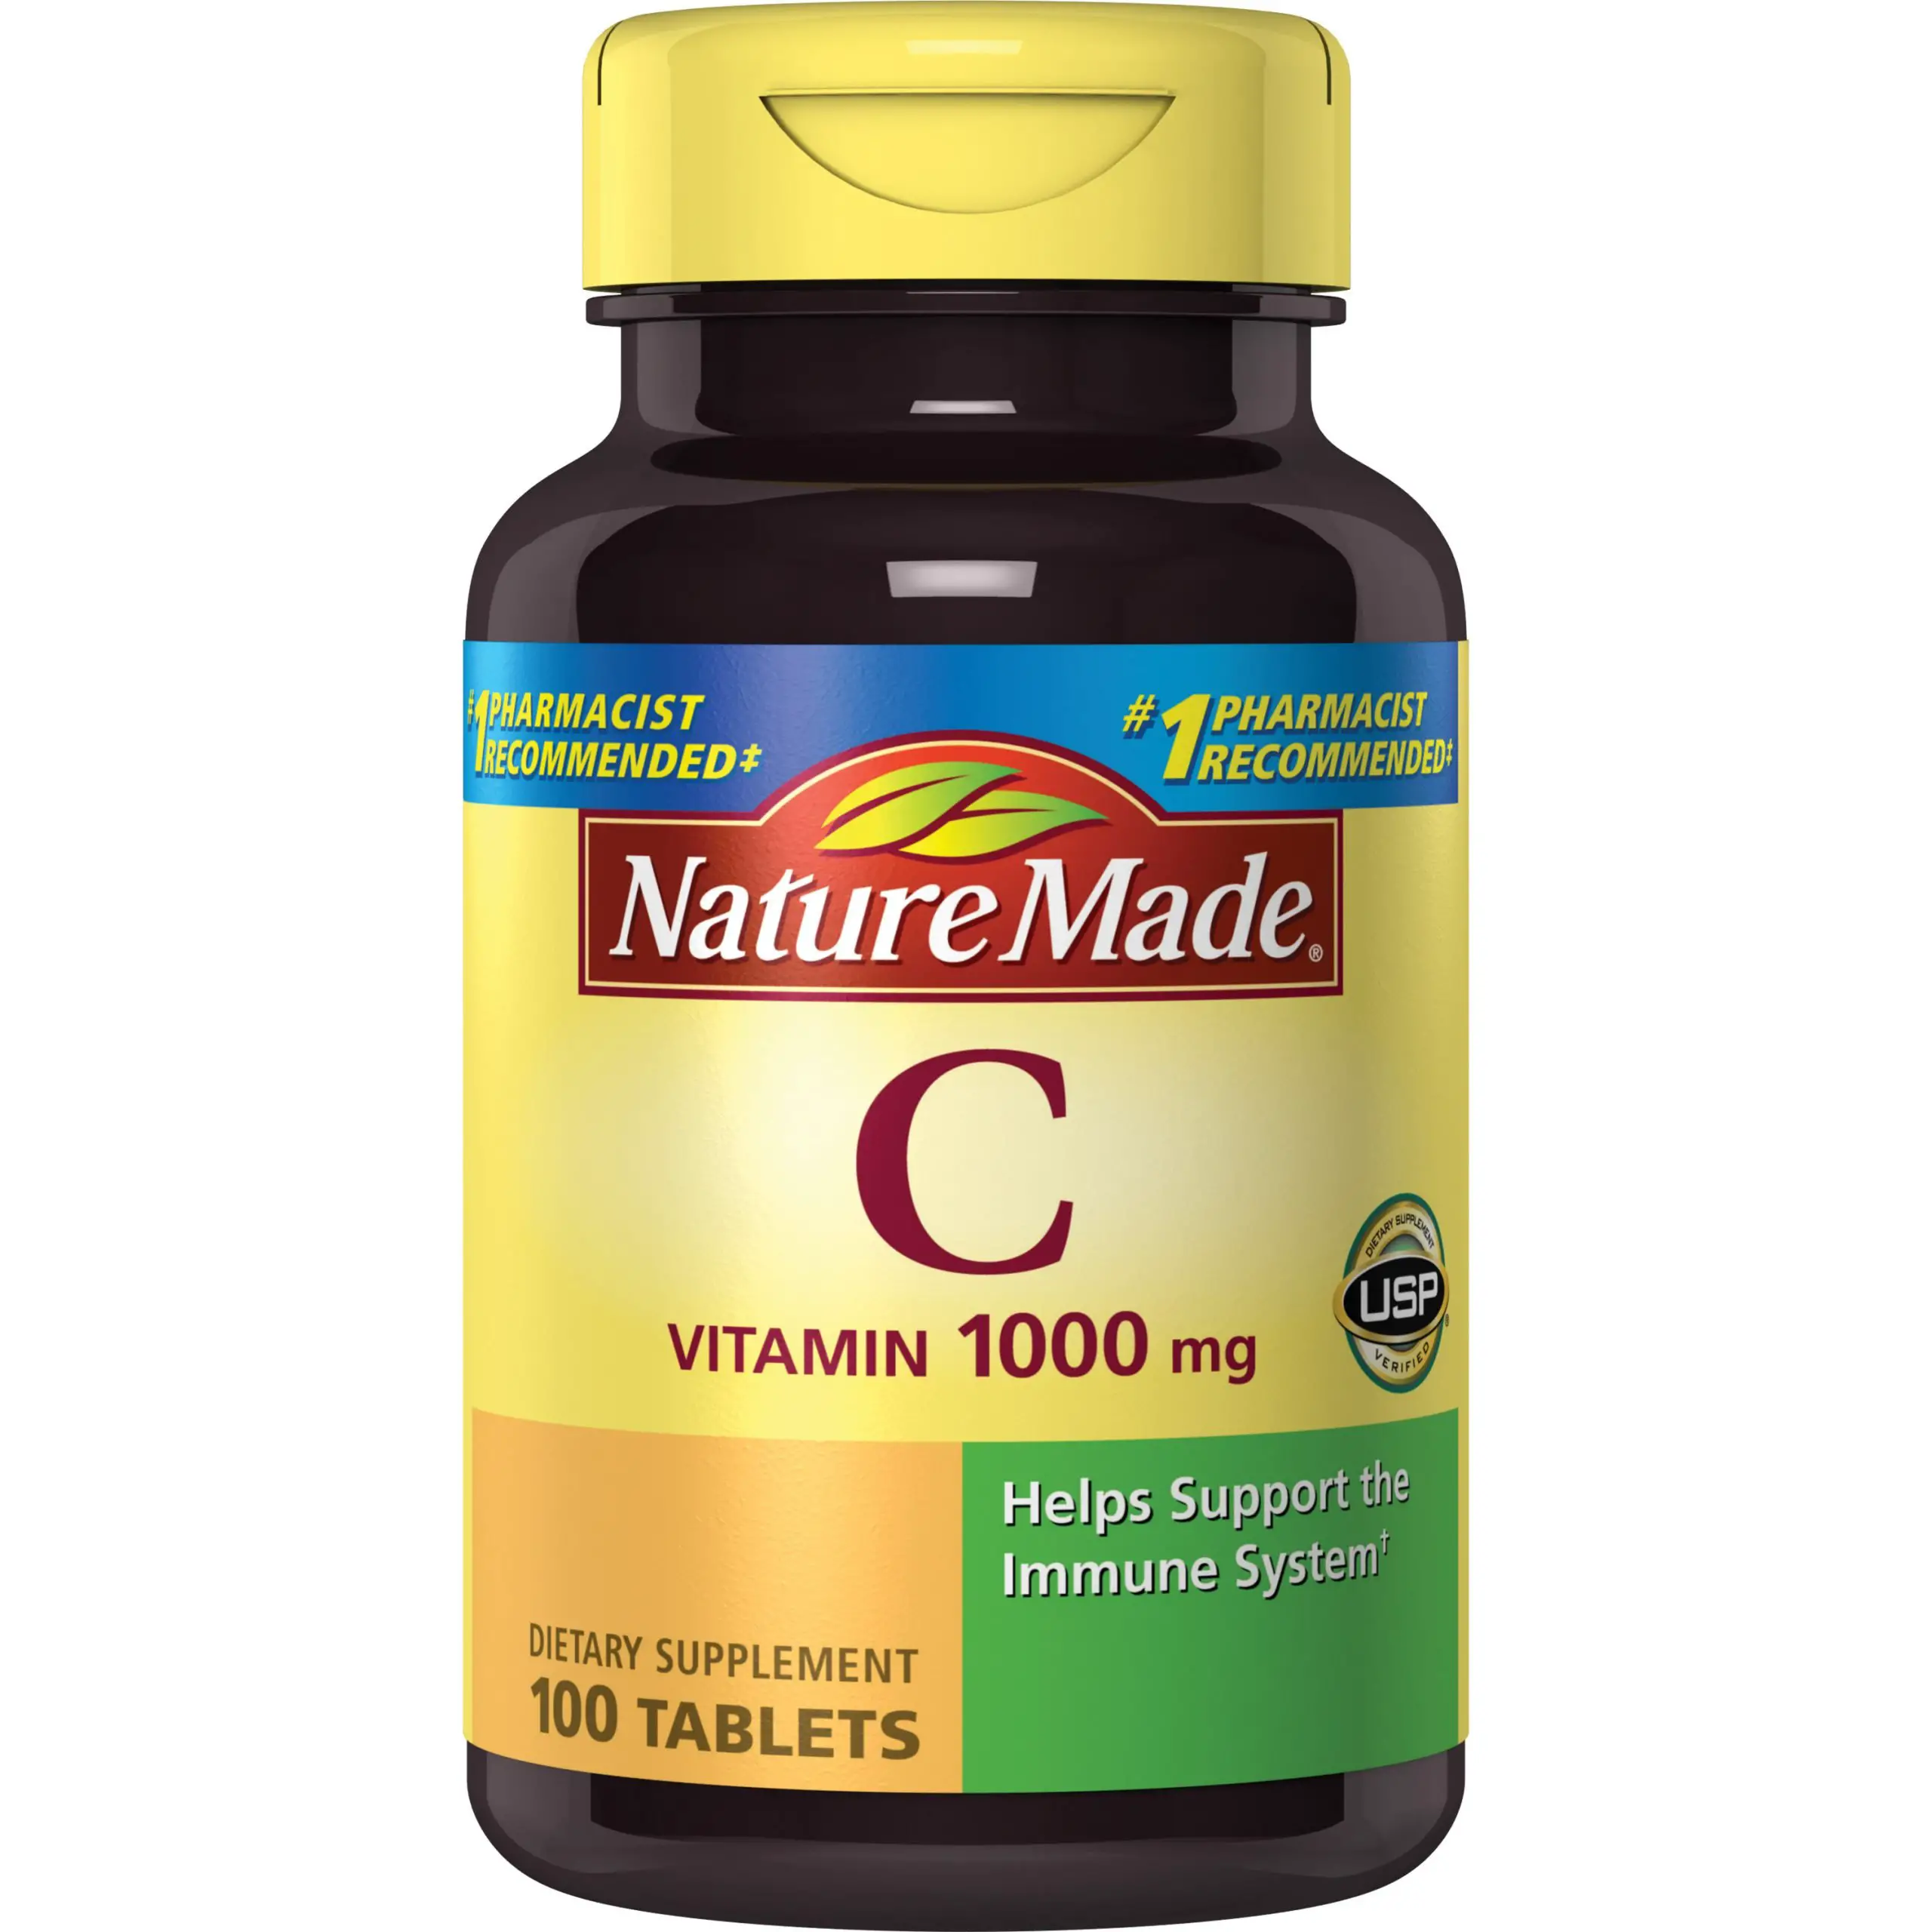 Nature Made Vitamin C 1000 mg Tablets, 100 Count